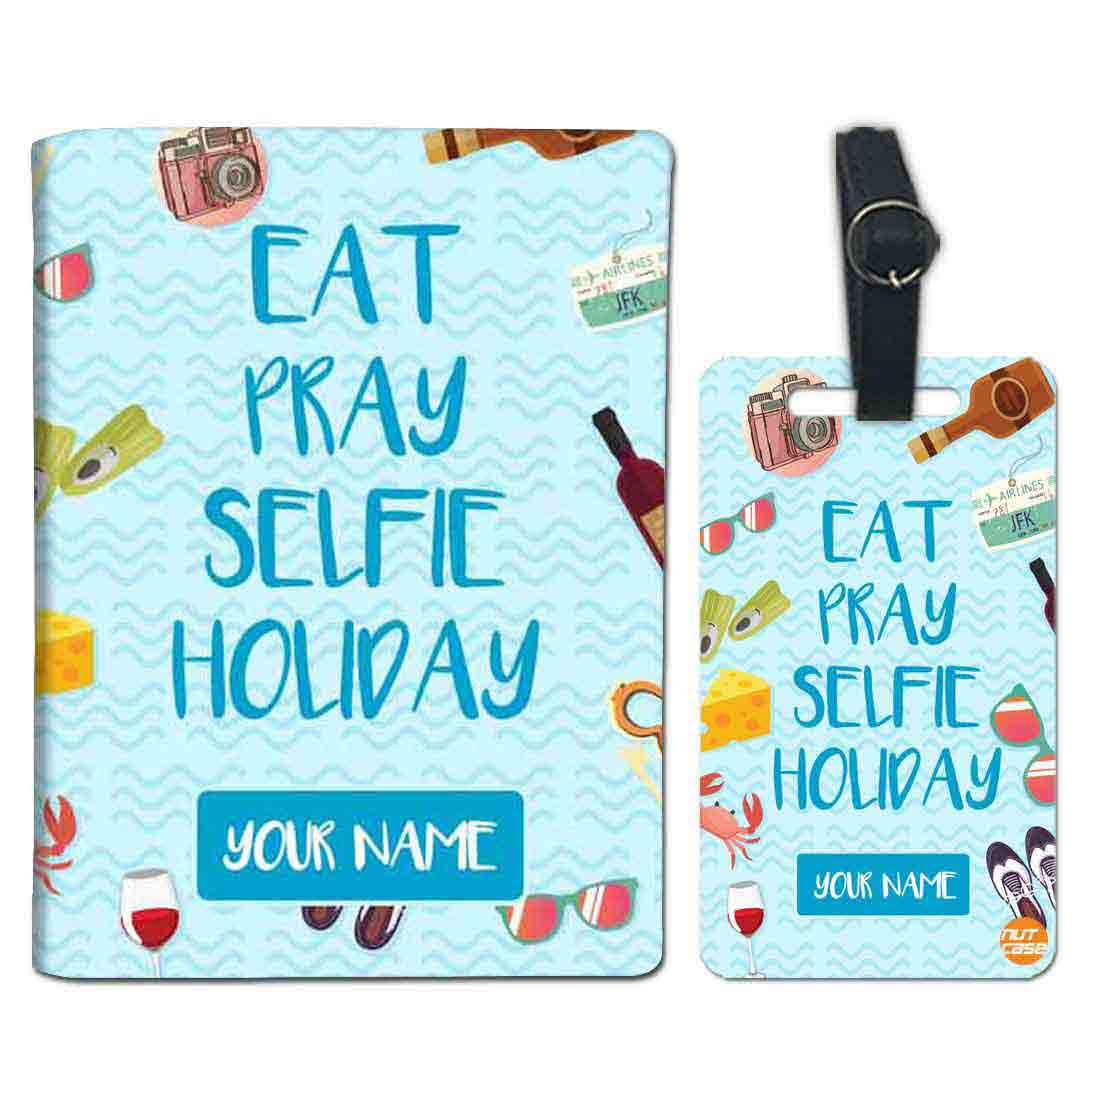 Personalized Fancy Passport Cover -  Eat Pray Selfie Holiday